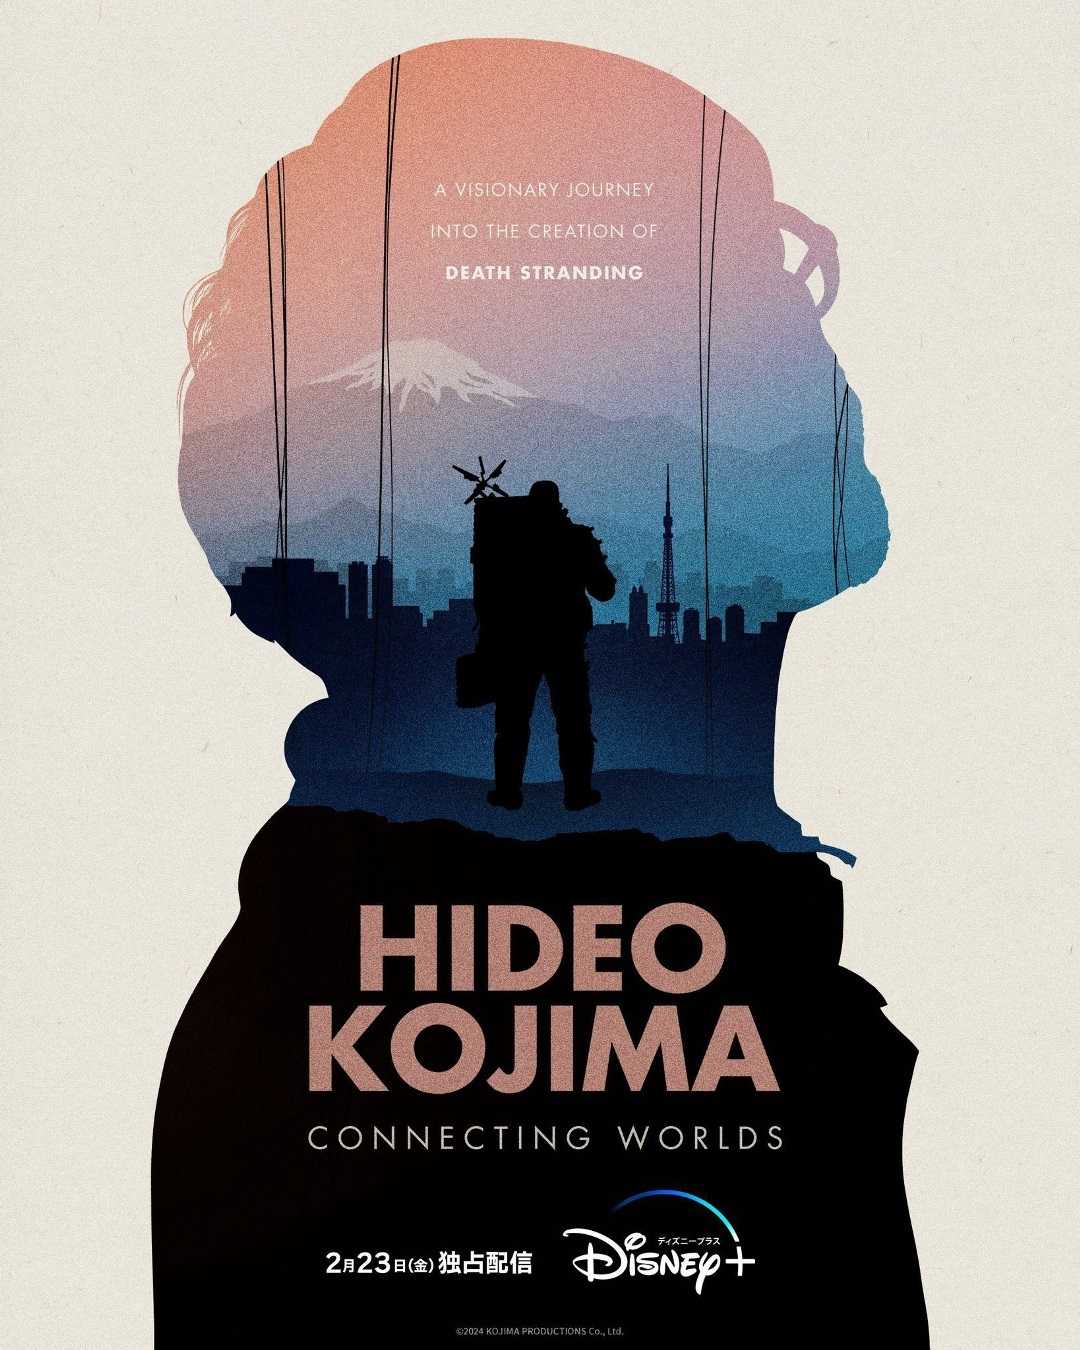 Hideo Kojima: Connecting Worlds, the documentary's debut date revealed